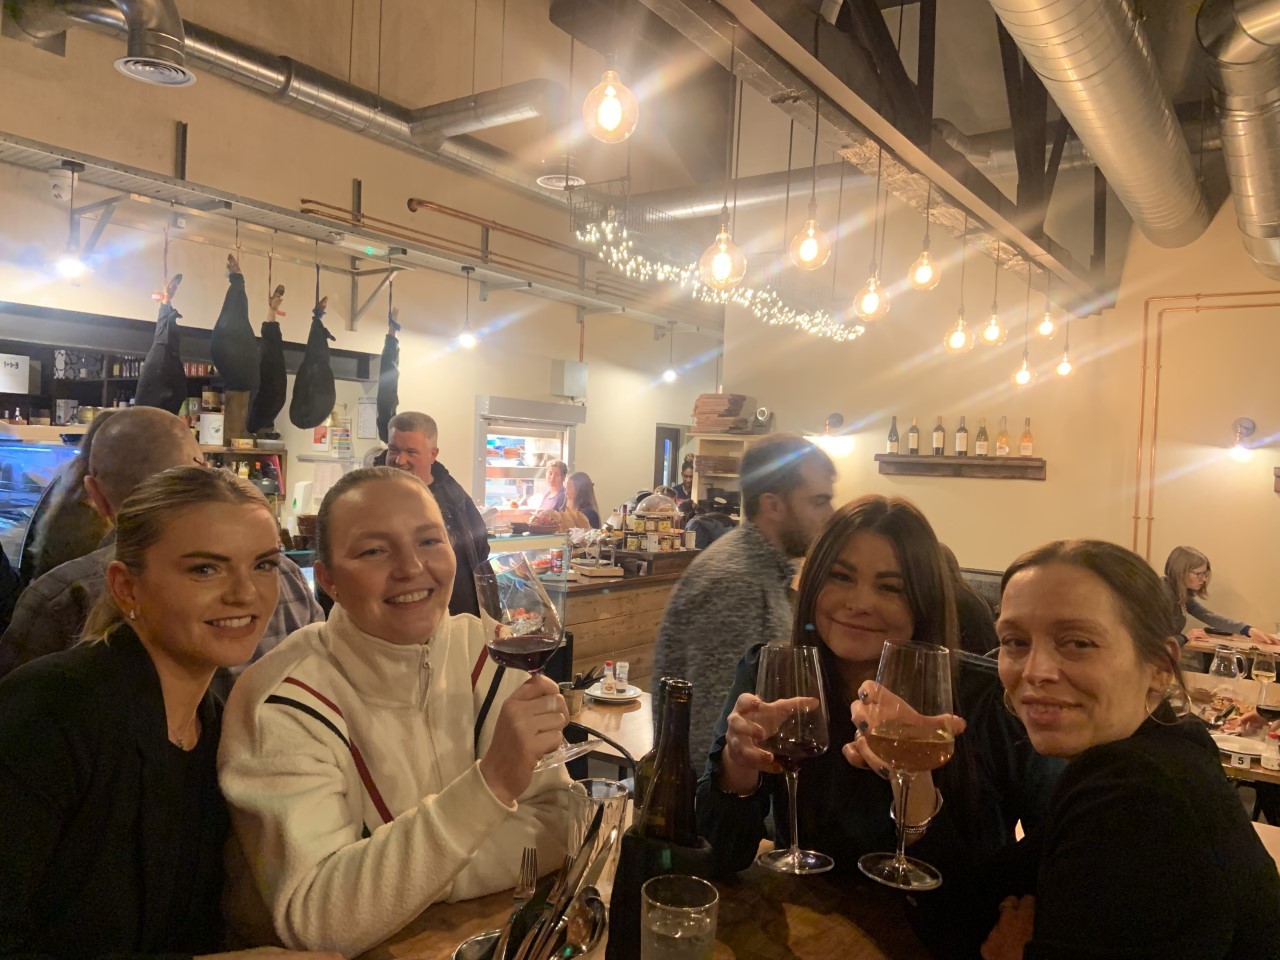 Looking forward to our Xmas works night out in Manchester but a little pre one to get us in the mood the other week was good fun. Food giggles and a little wine always a nice treat at Santiagos.